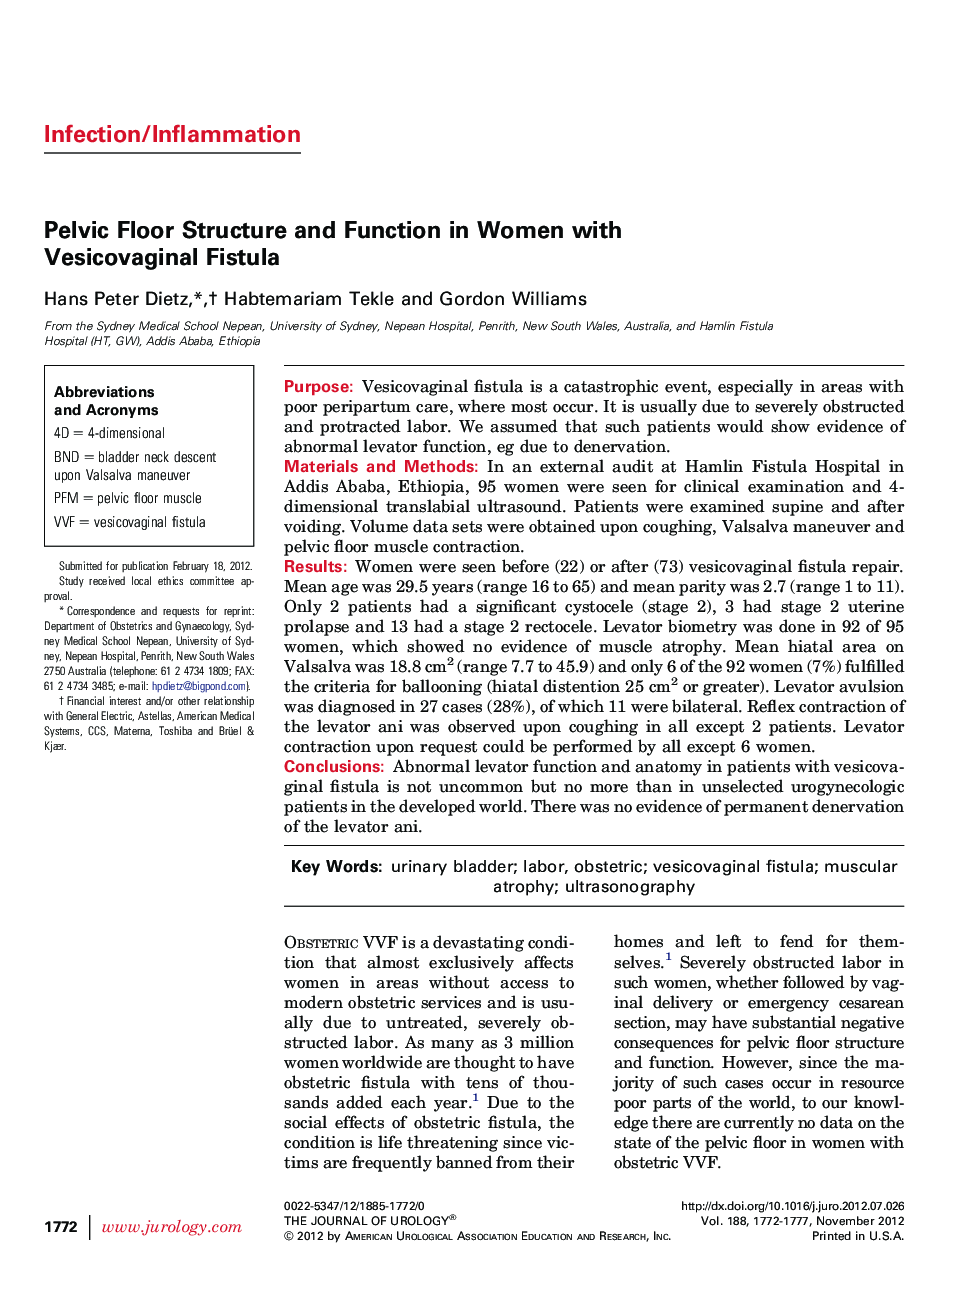 Pelvic Floor Structure and Function in Women with Vesicovaginal Fistula